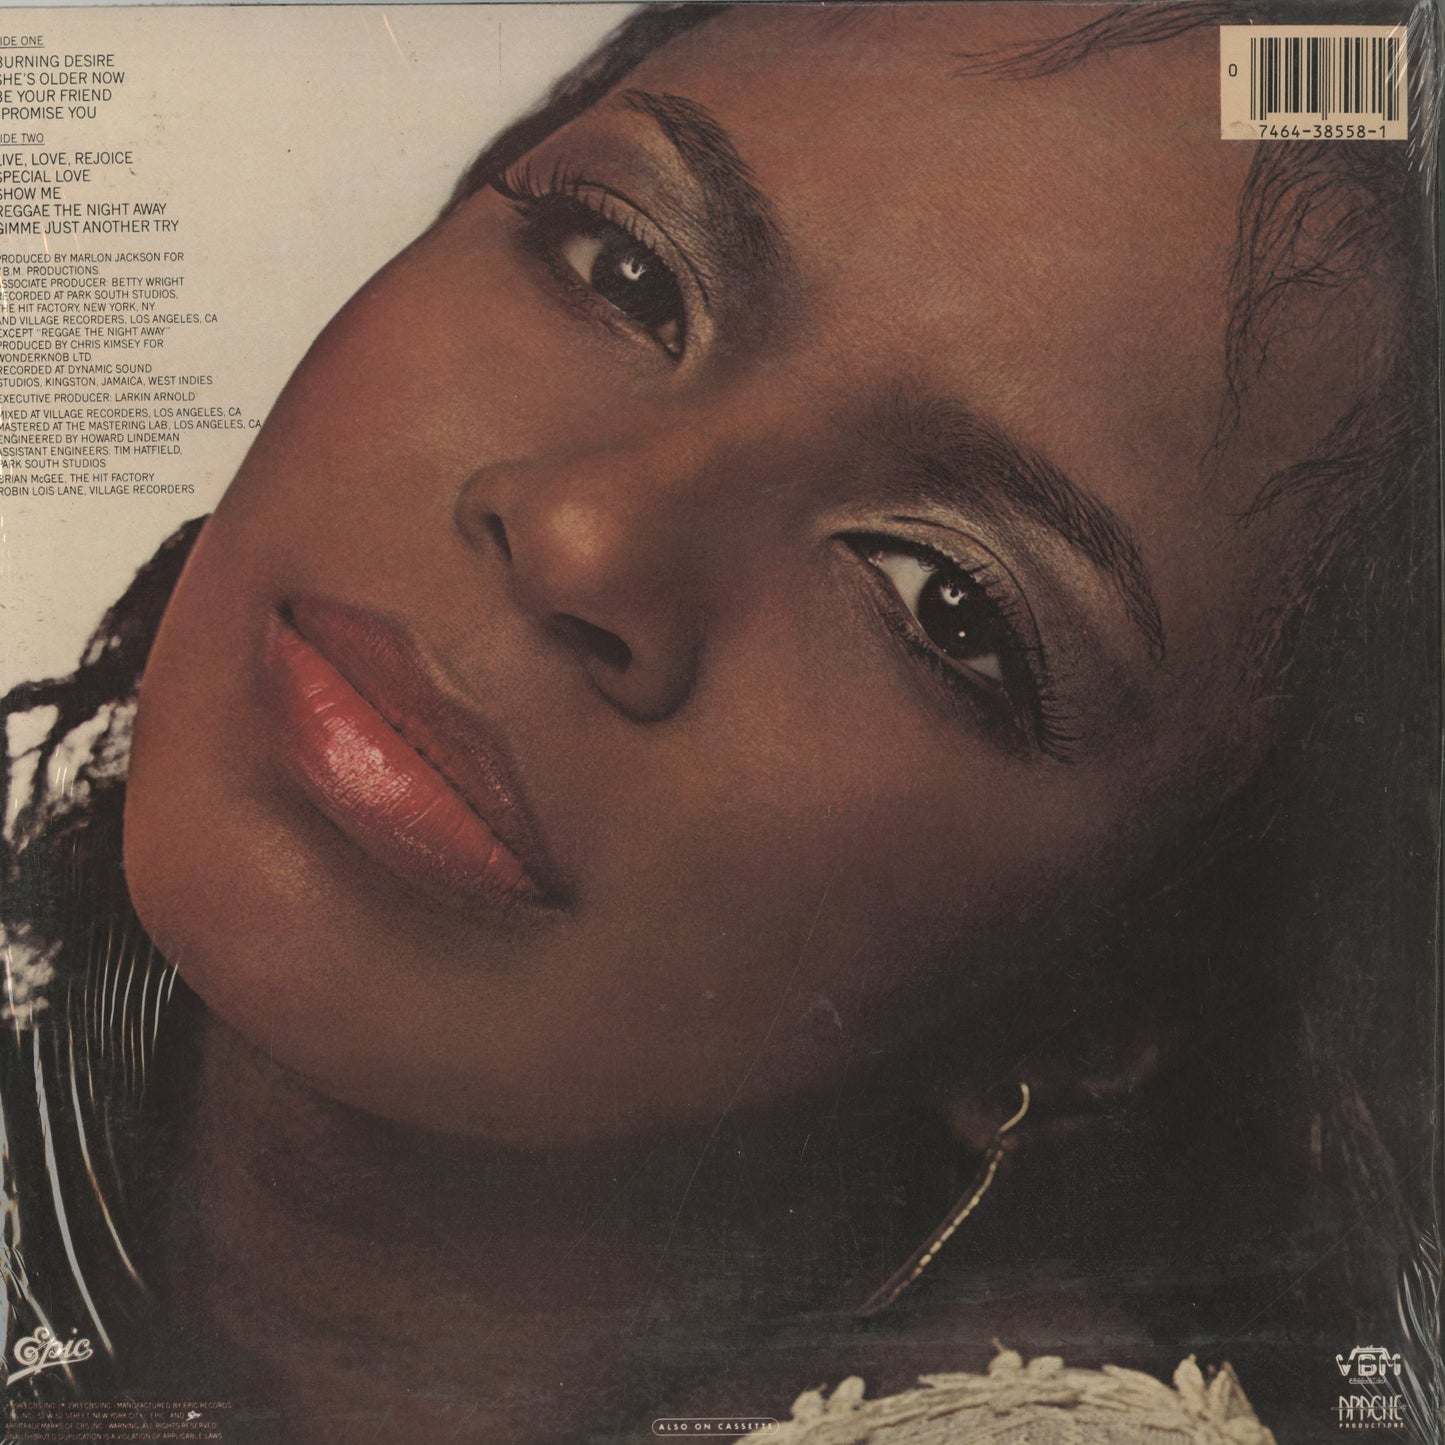 Betty Wright / ベティ・ライト / Back At You (FE38558)